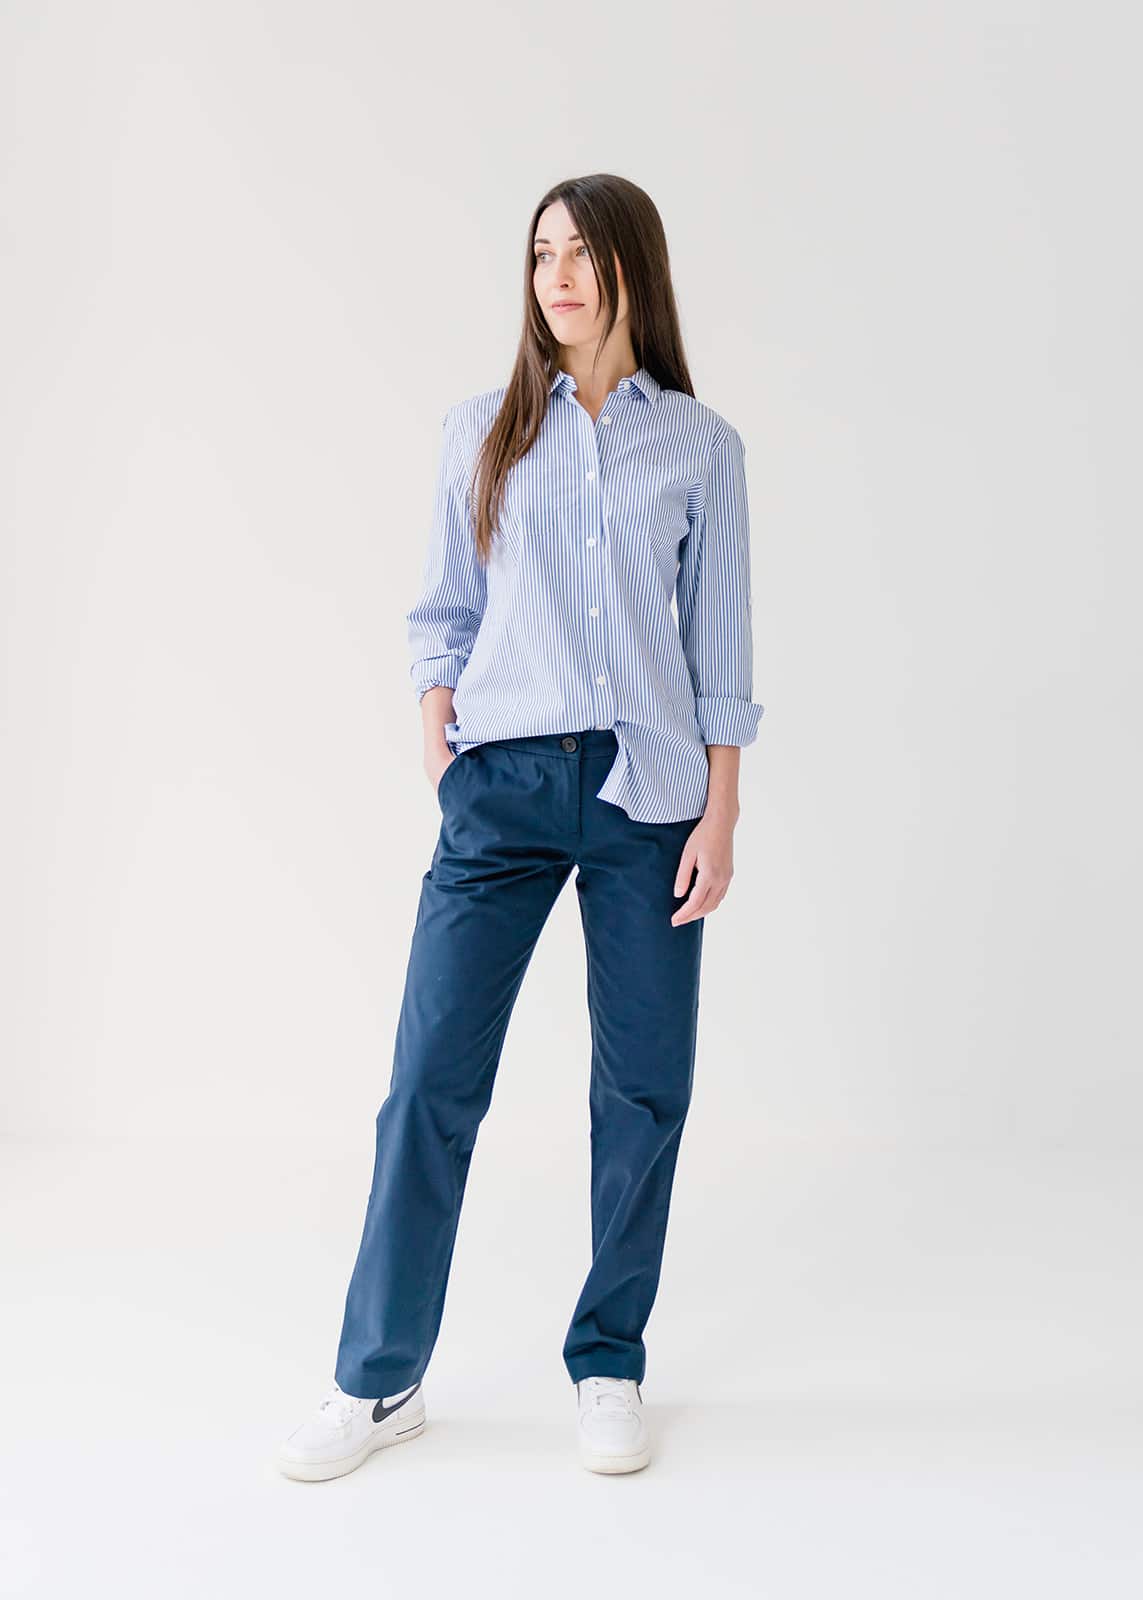 Women's Relaxed Fit Carpenter Pants - Dickies US